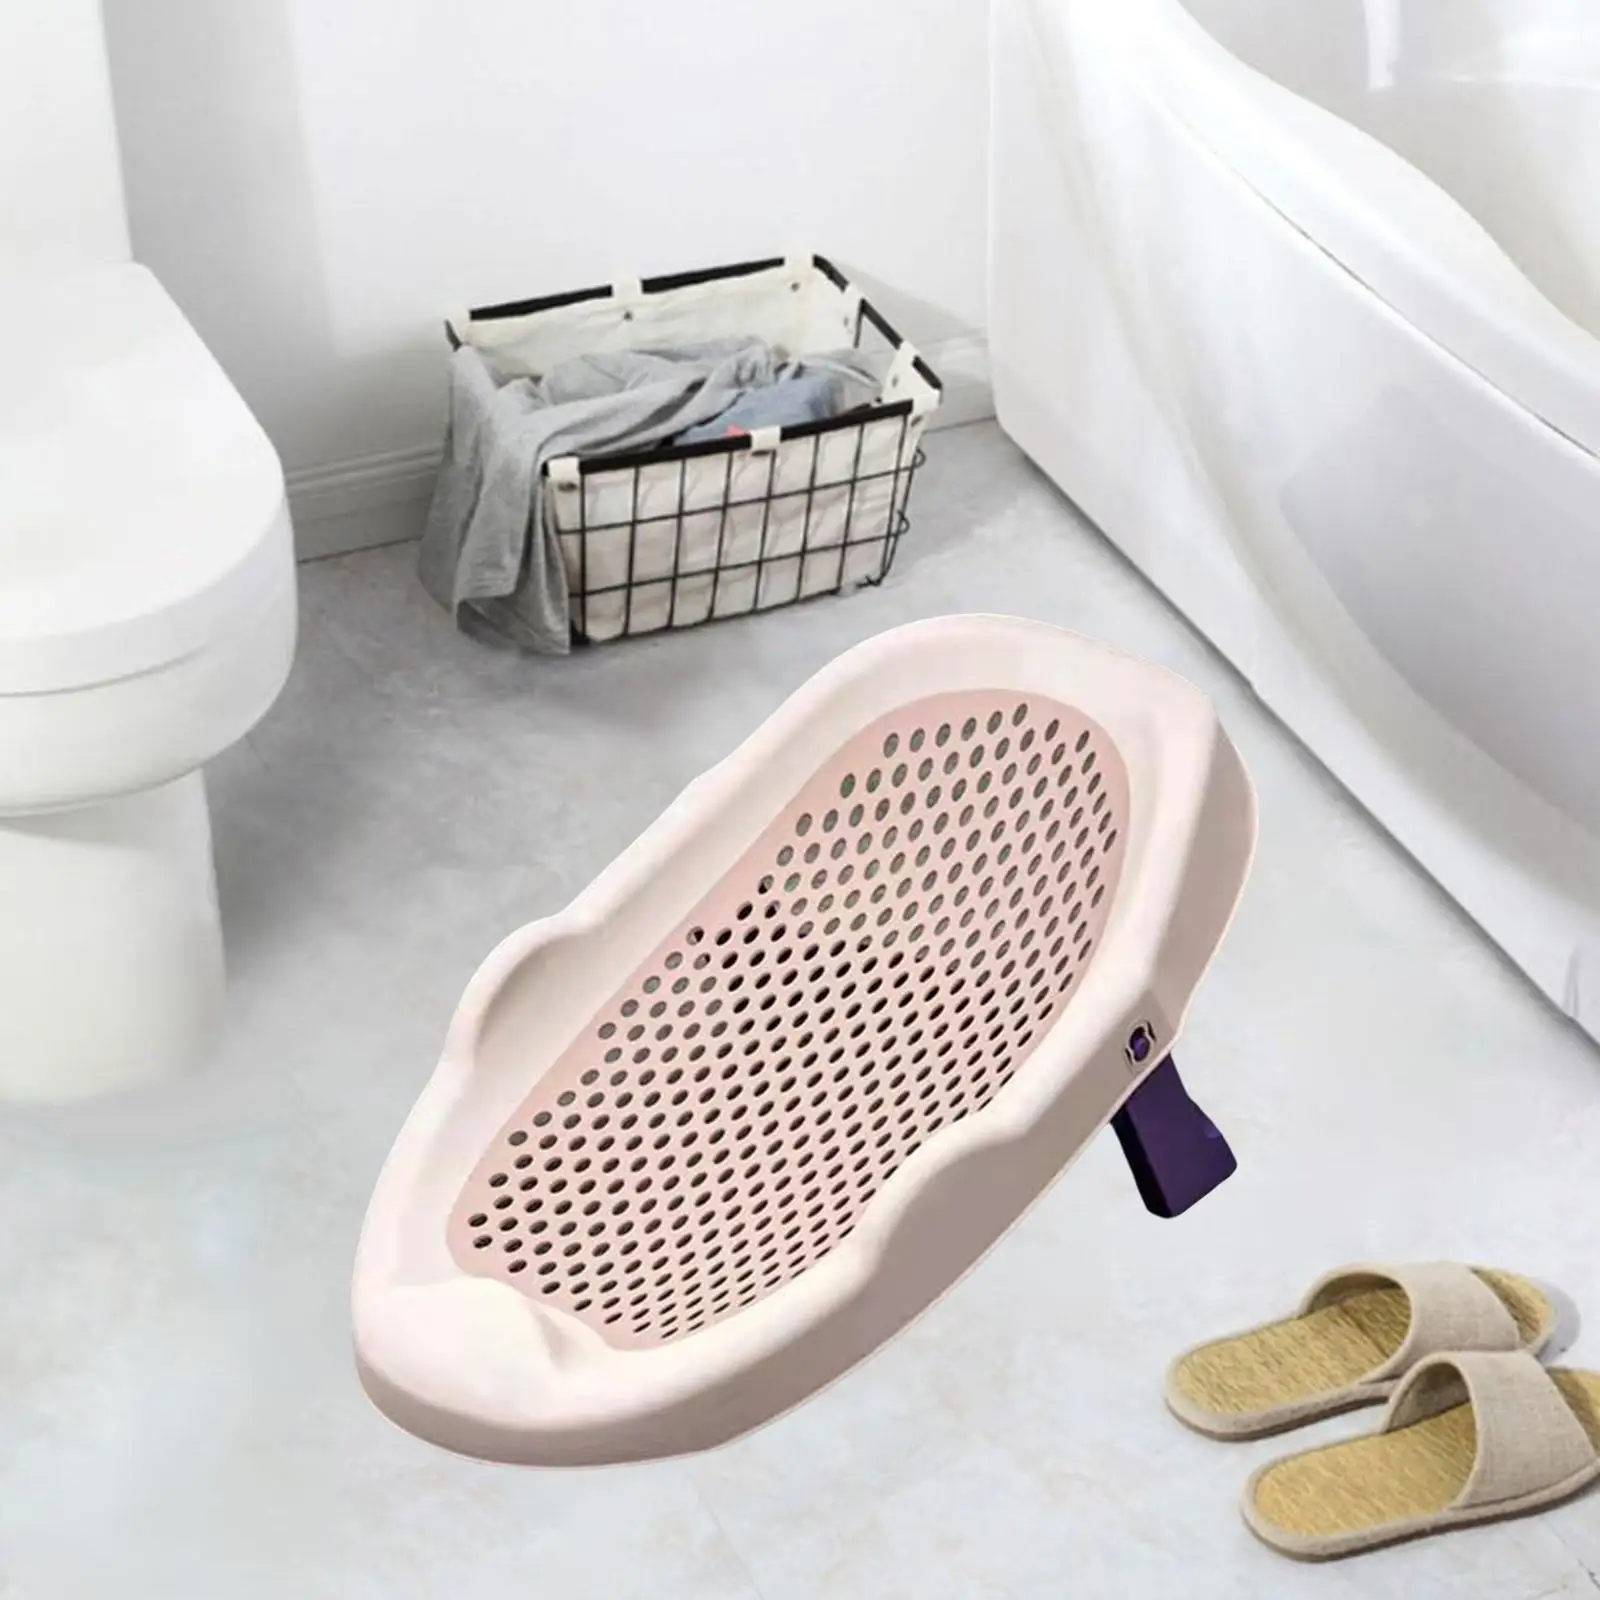 Baby Bath Seat Adjustable Foldable Breathable Anti Slip Shower Support for Baby